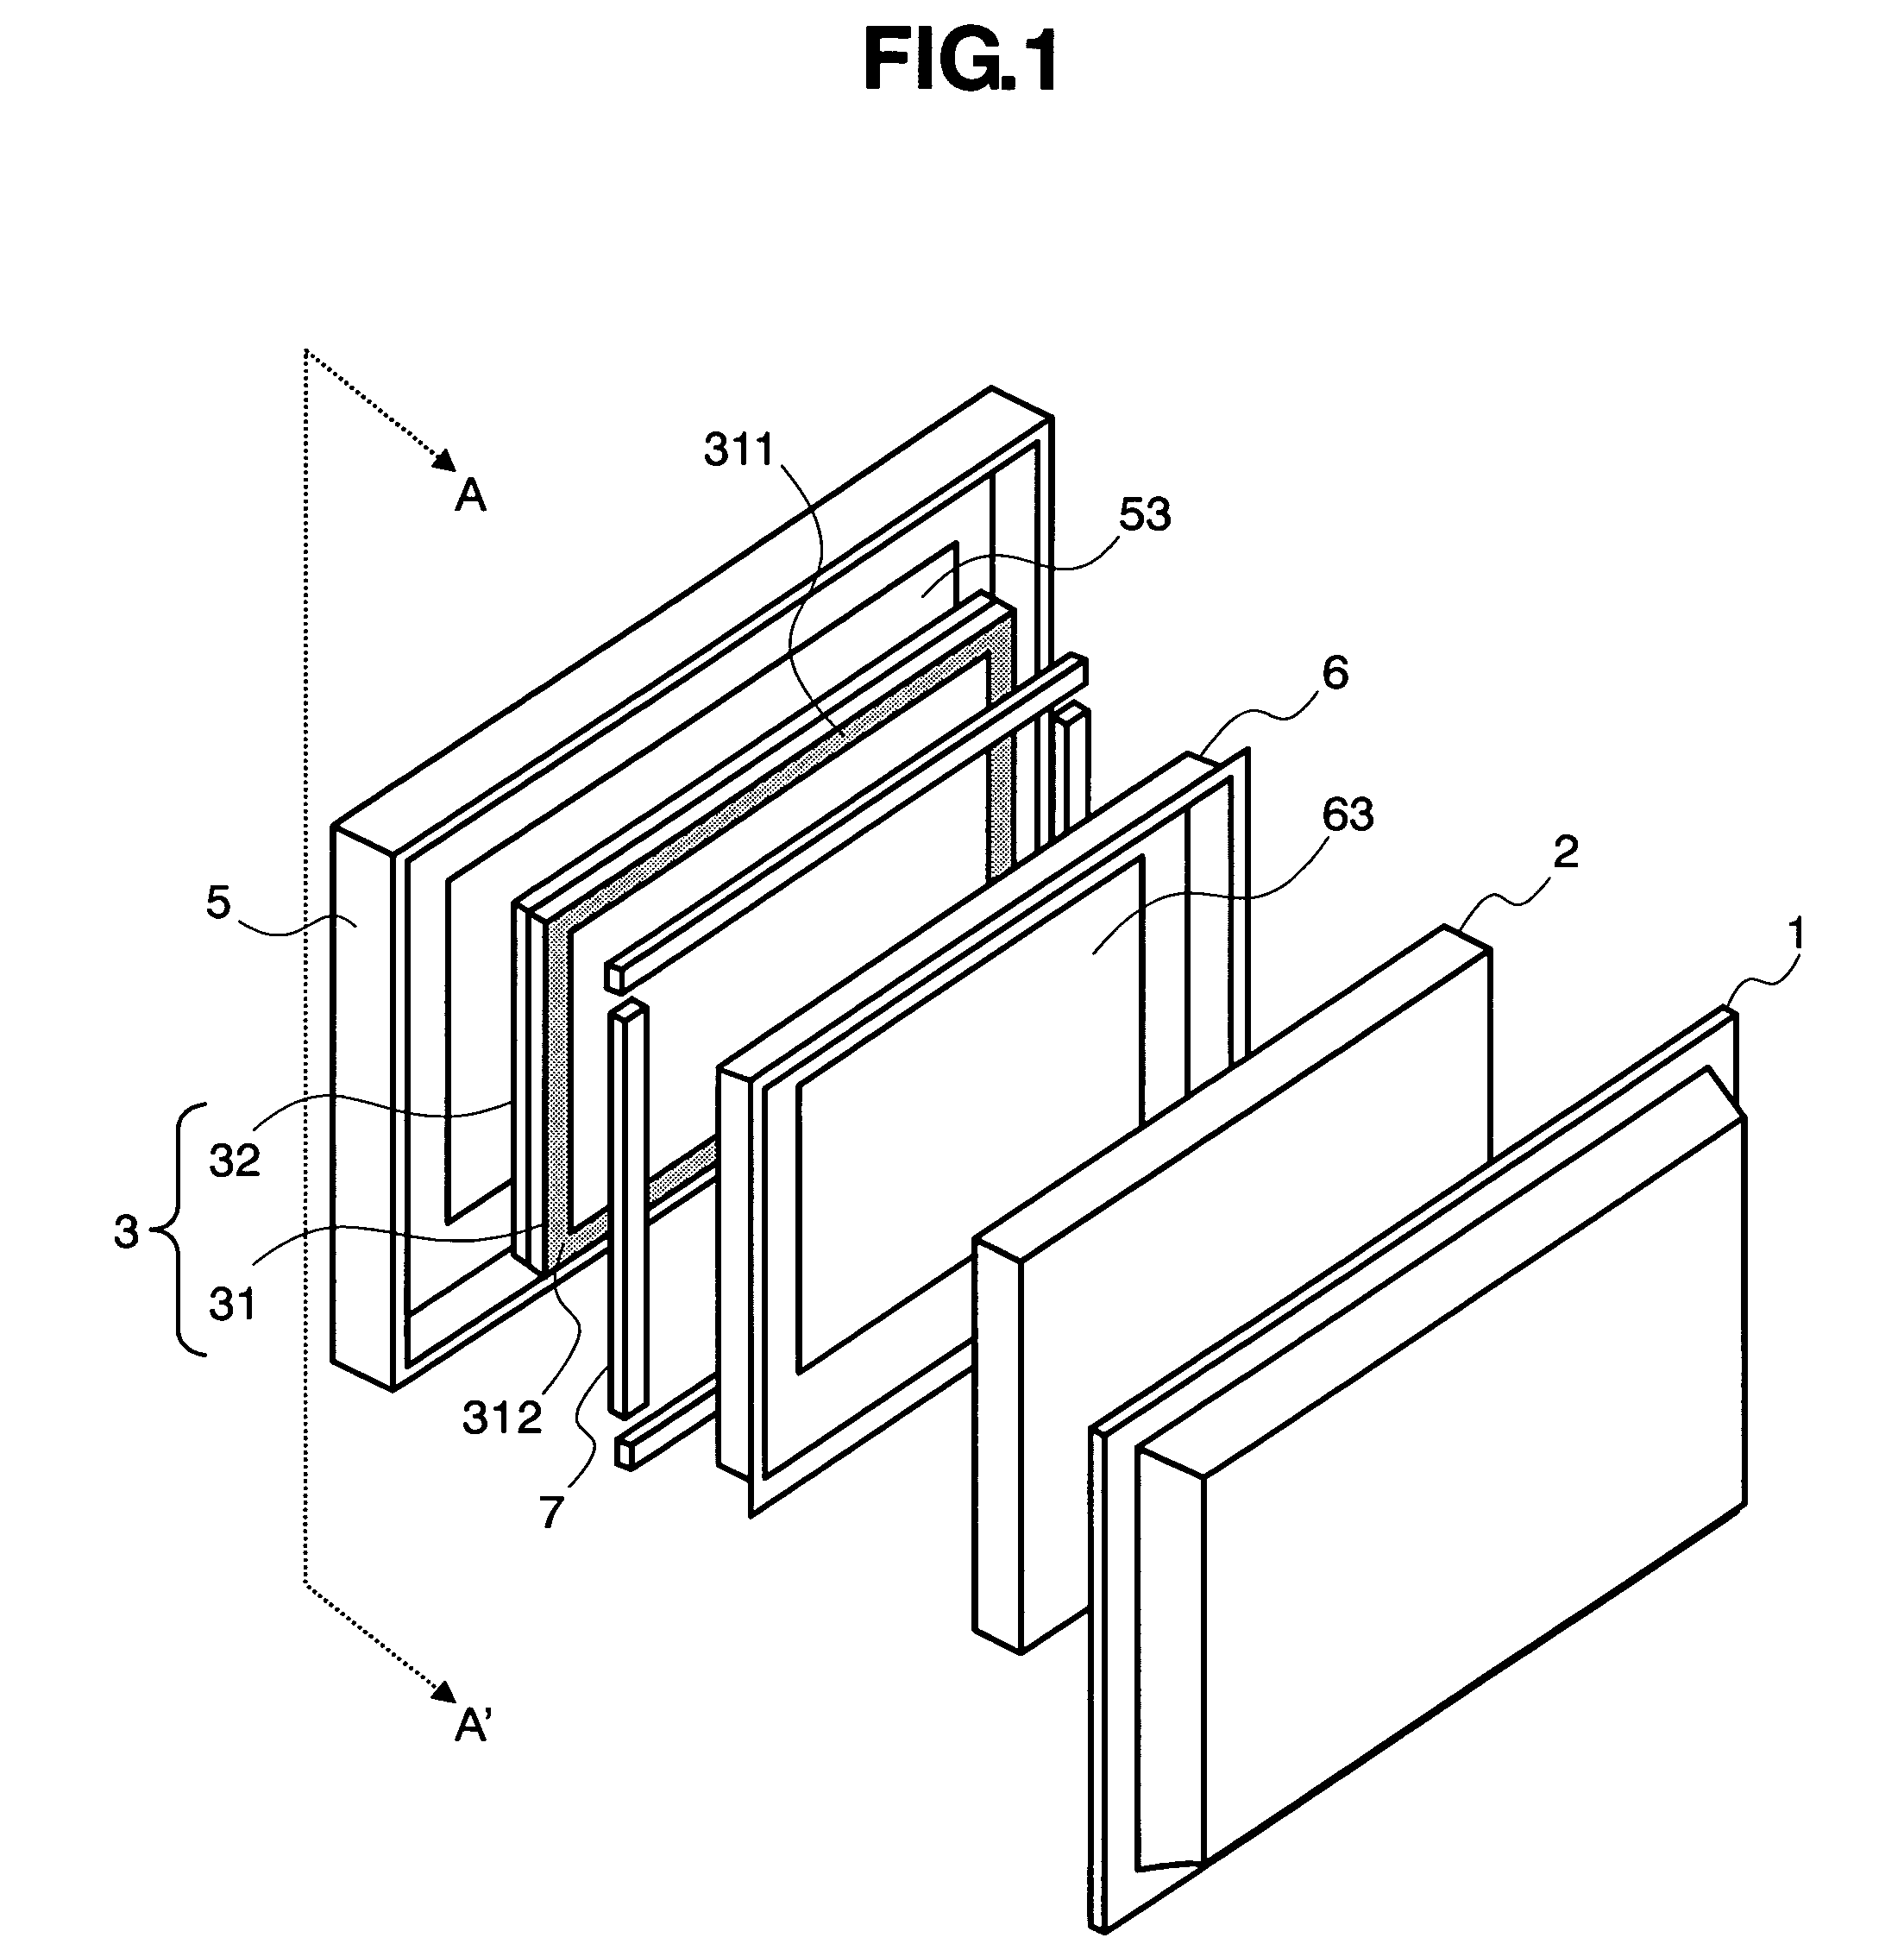 Plasma display apparatus with optical filter and elastic conductive body